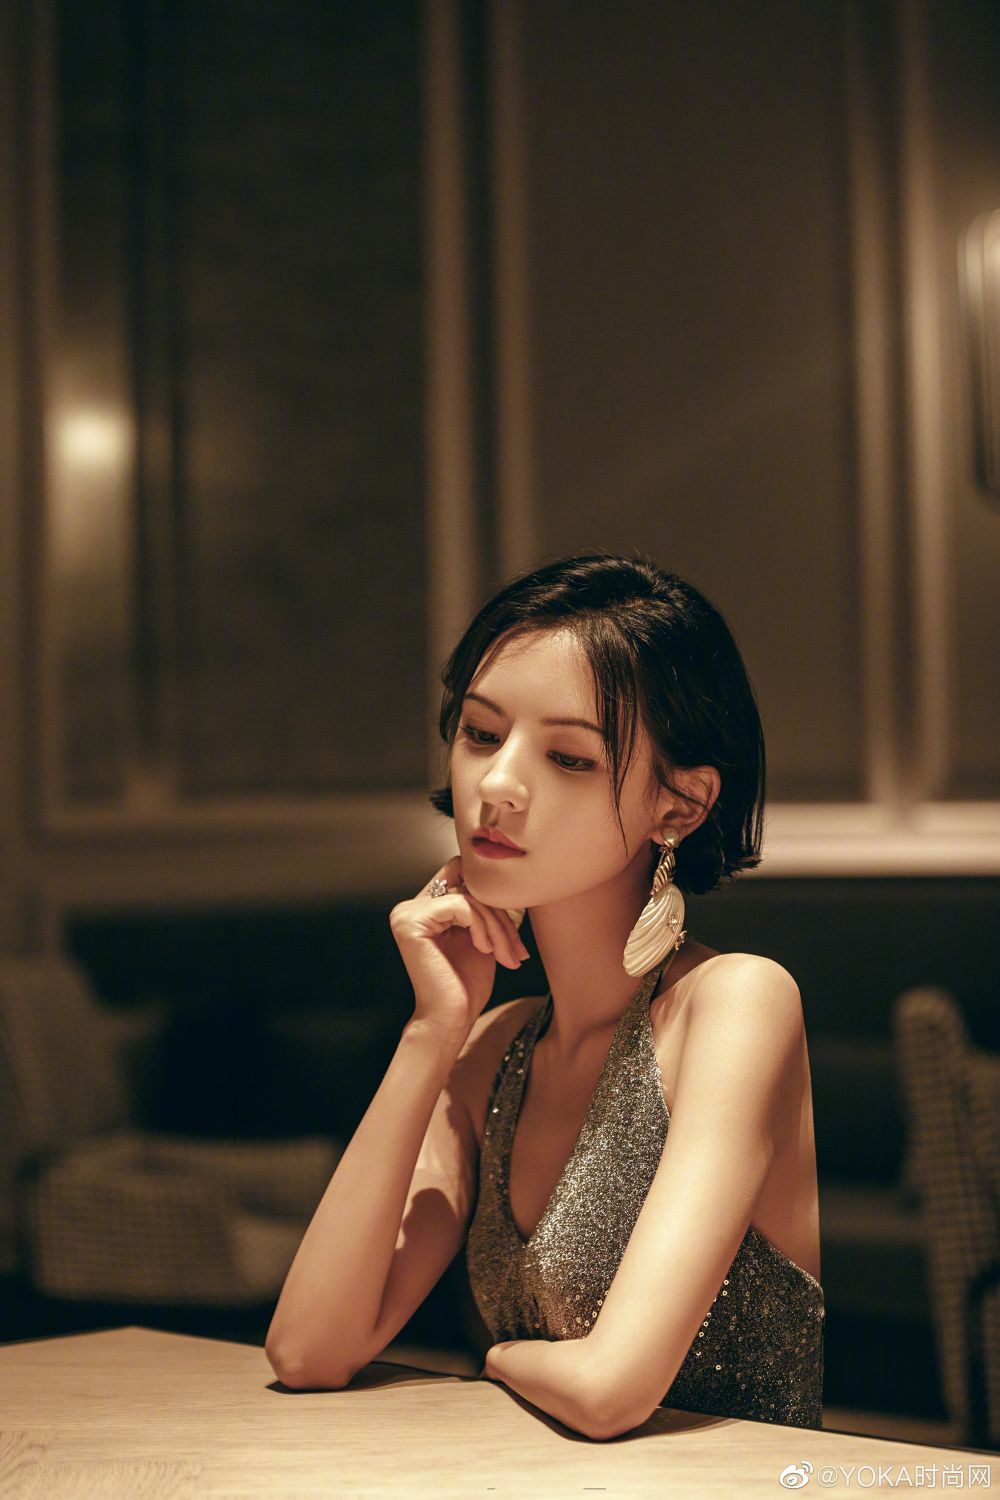 Yuxi Zhang Sexy and Hottest Photos , Latest Pics